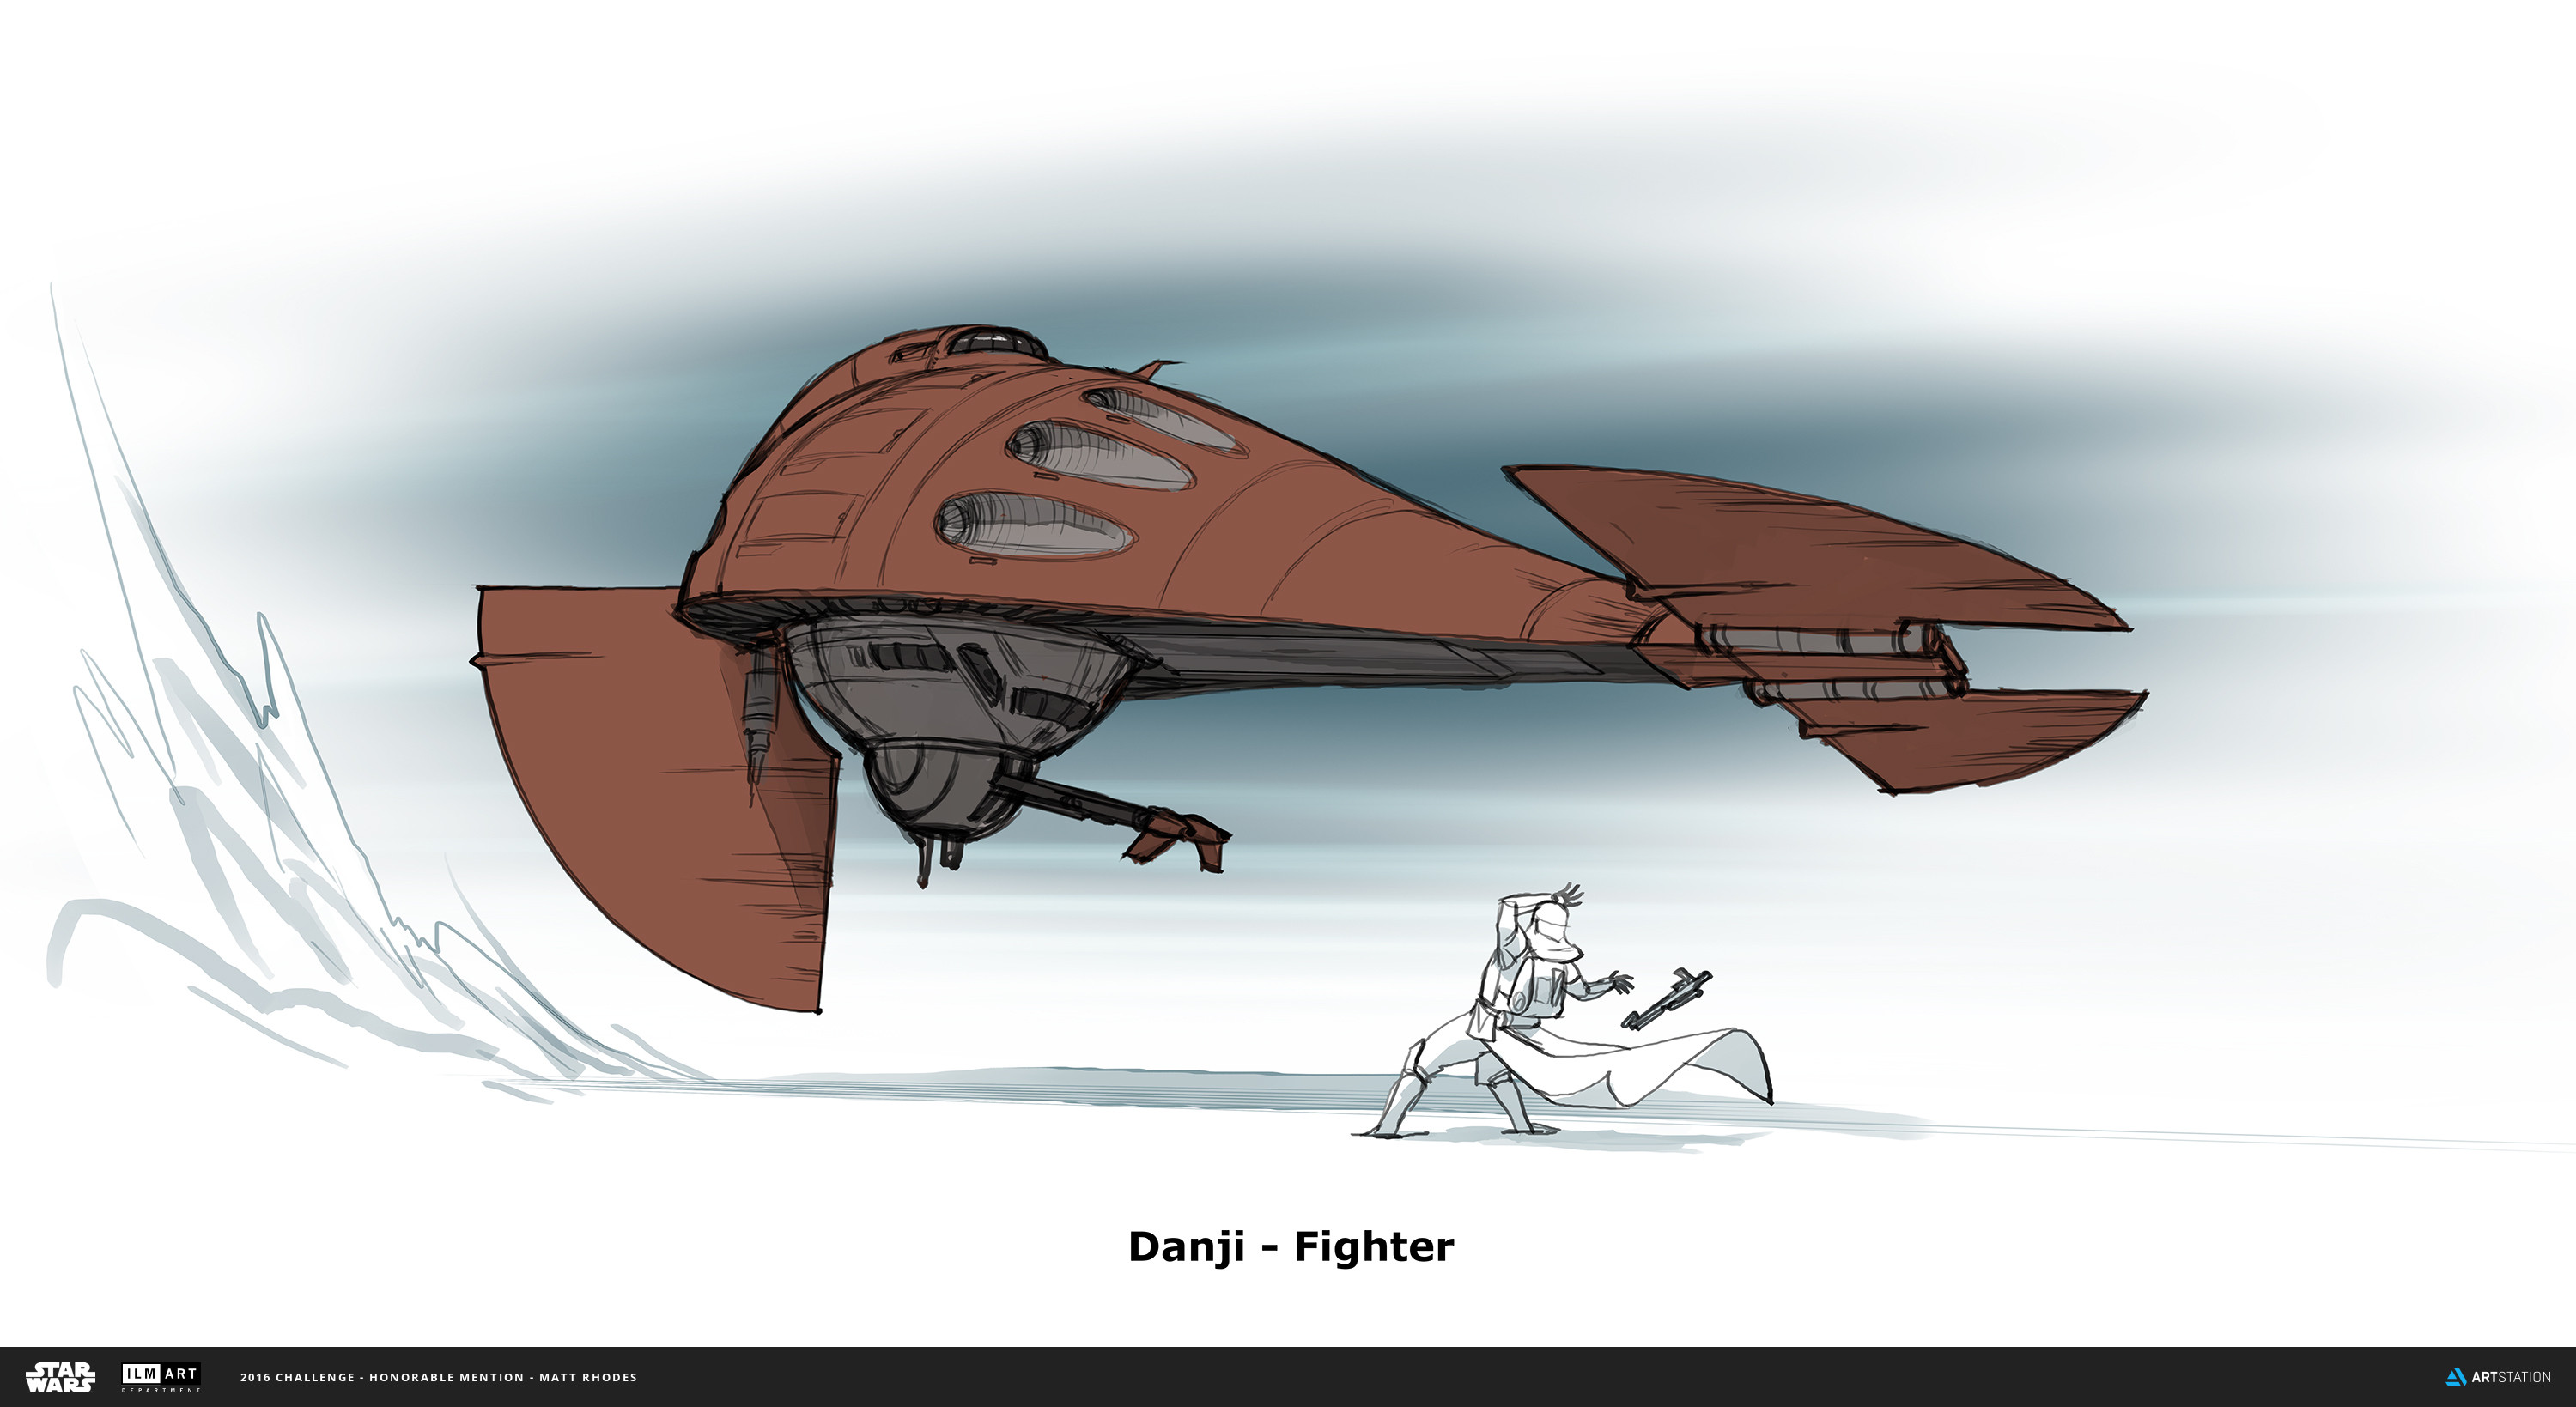 The Fighter is a 2-person craft, pilot and gunner like many star wars fighter craft. It can land on the ground by folding its fore-wings down. You can see in the reference that this is based on an upside down oil lamp.